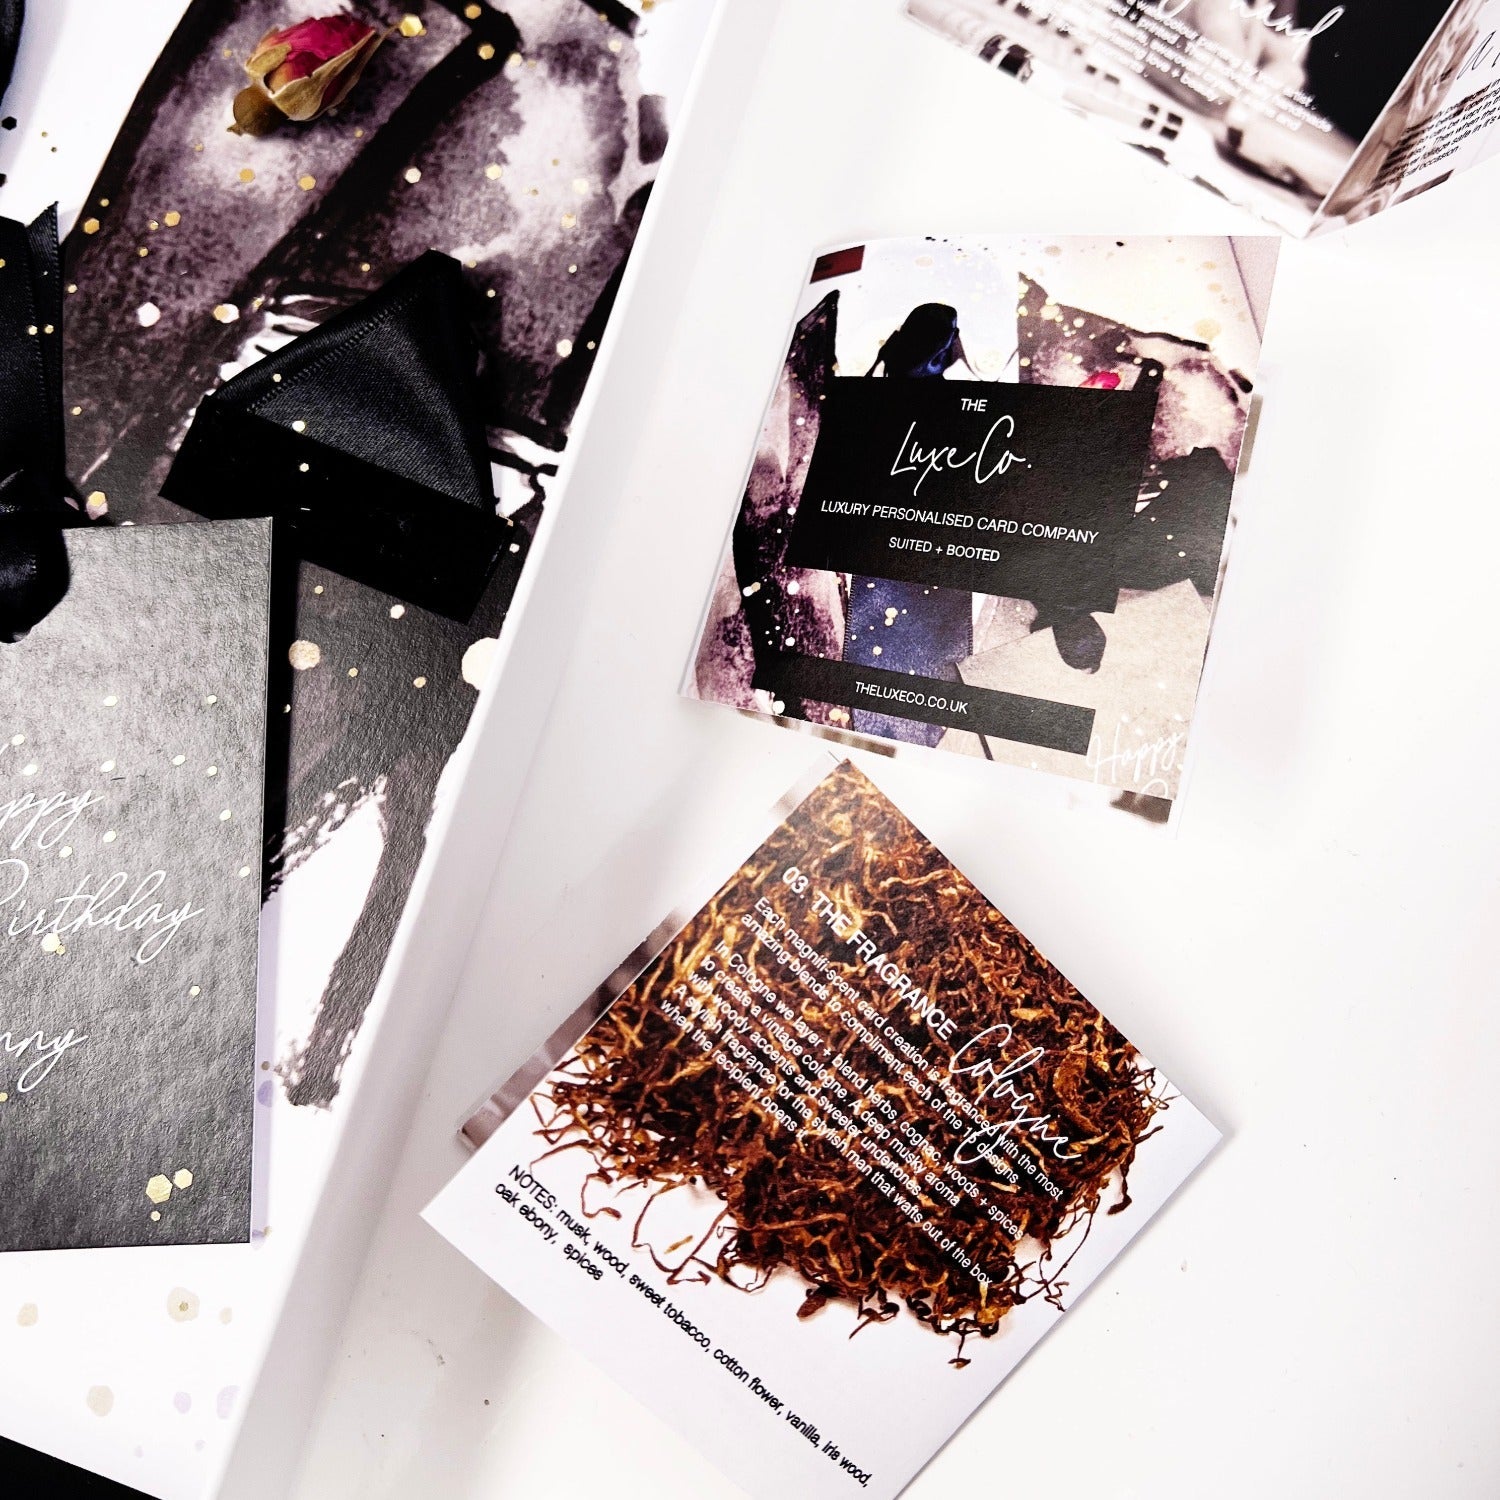 Mens cards scented with cologne. The most amazing luxury cards for him